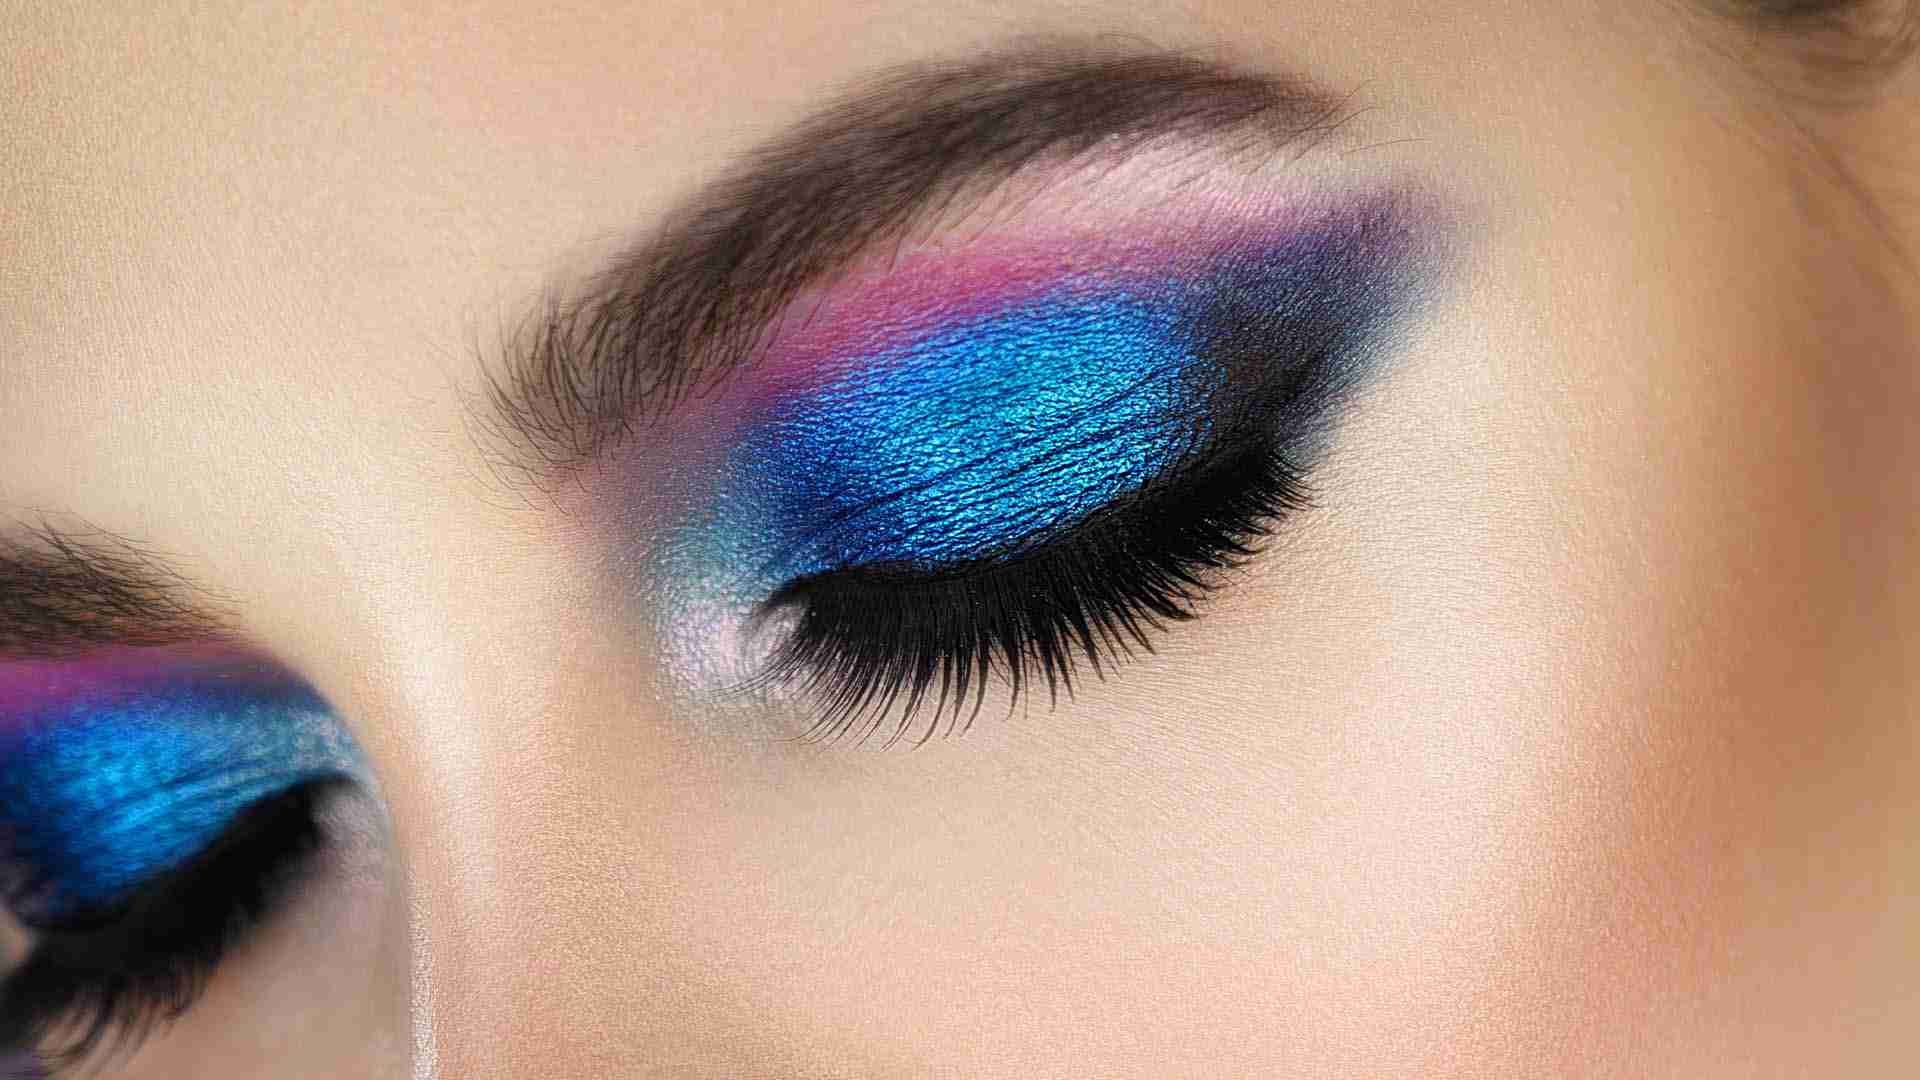 3. Best Makeup Looks for Pink Eyes and Blue Hair - wide 4